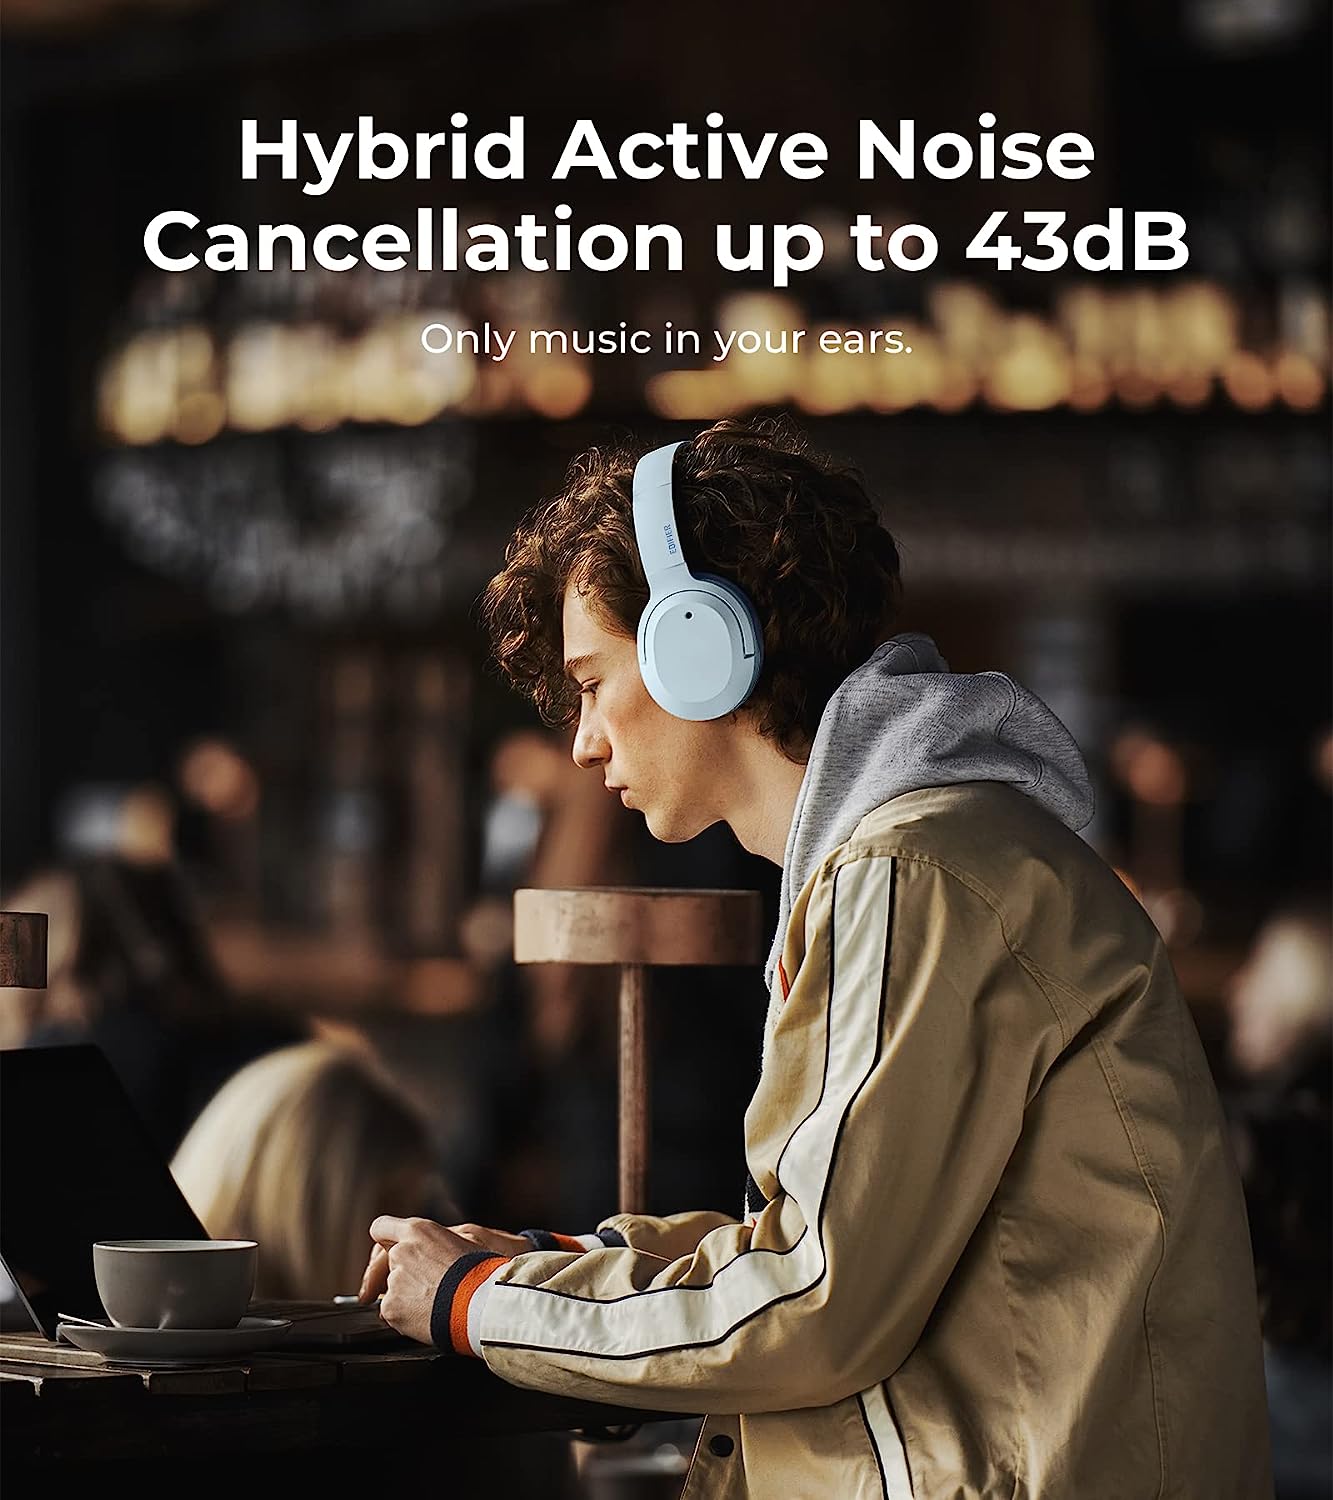 Edifier W820NB Plus Hybrid Active Noise Cancelling Headphones - LDAC Codec - Hi-Res Audio Wireless & Wired - Fast Charge - Over Ear Bluetooth V5.2 Headphones for Travel/Home/Office- Ivory